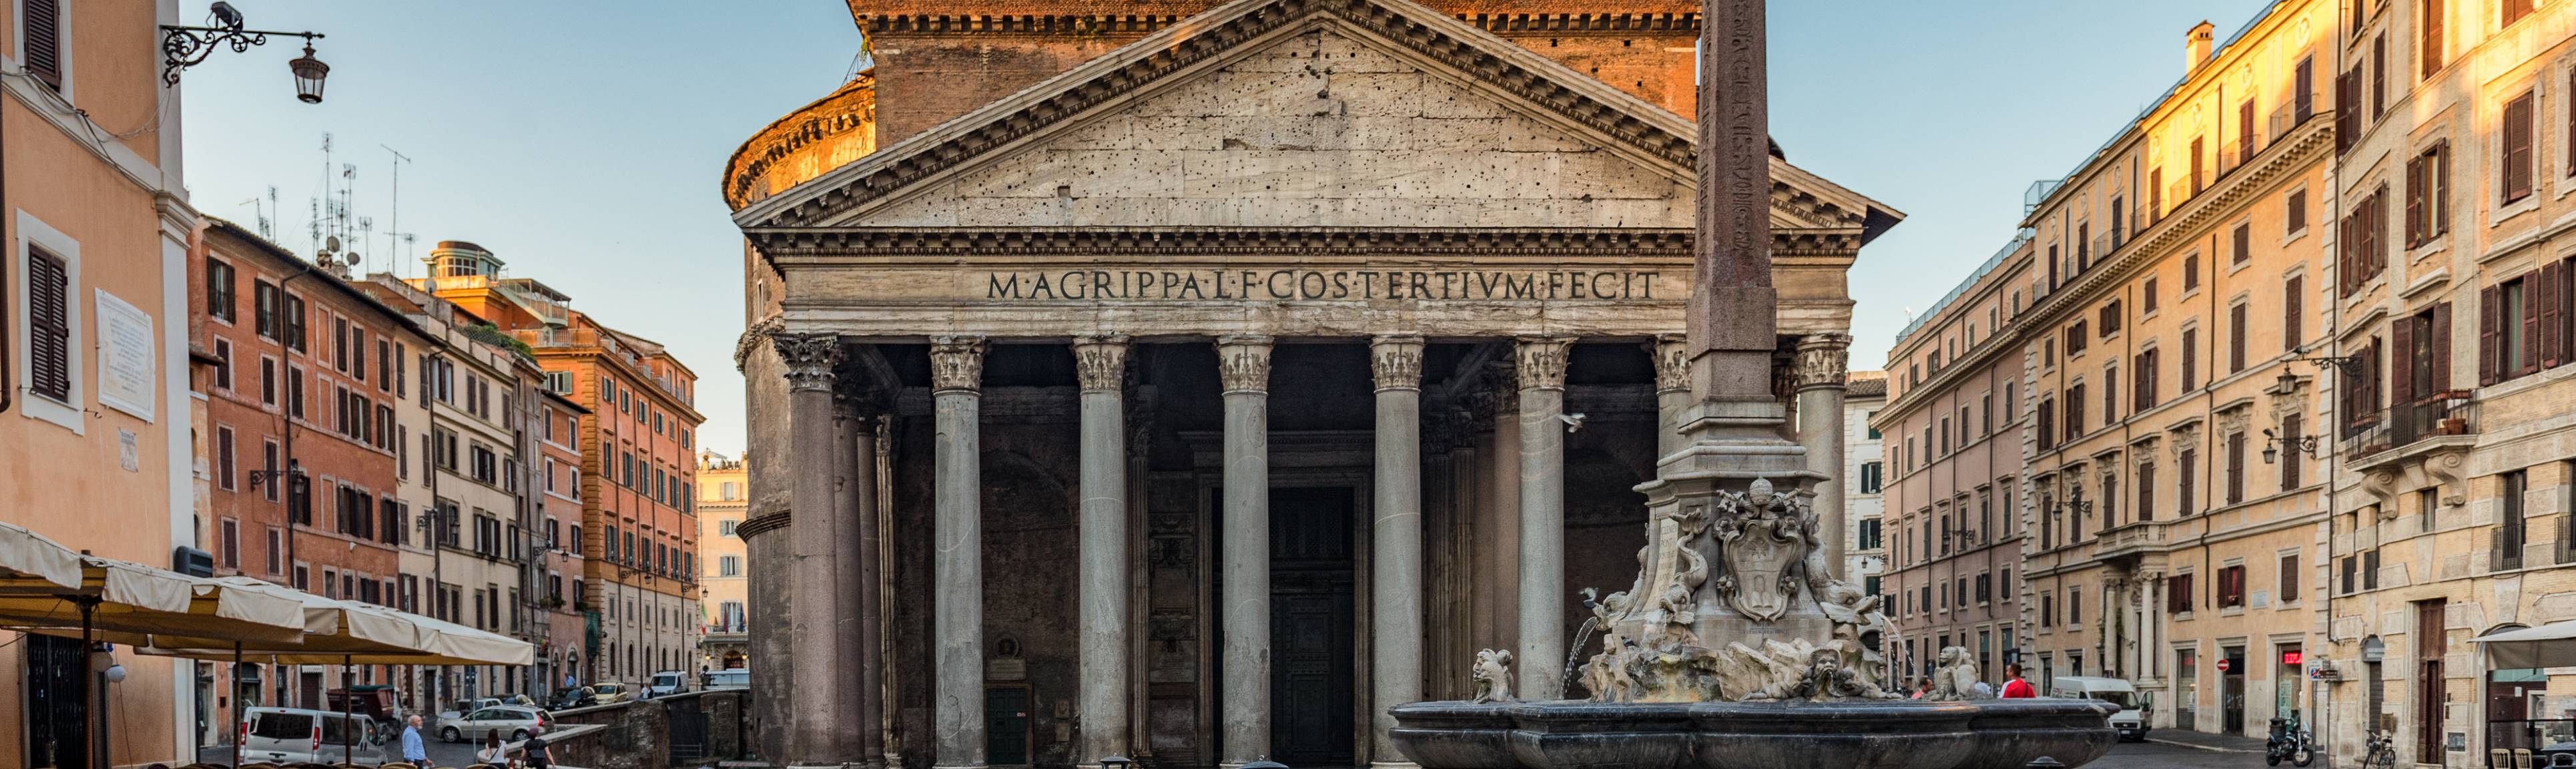 View of front facade of Pantheon in Rome, Italy